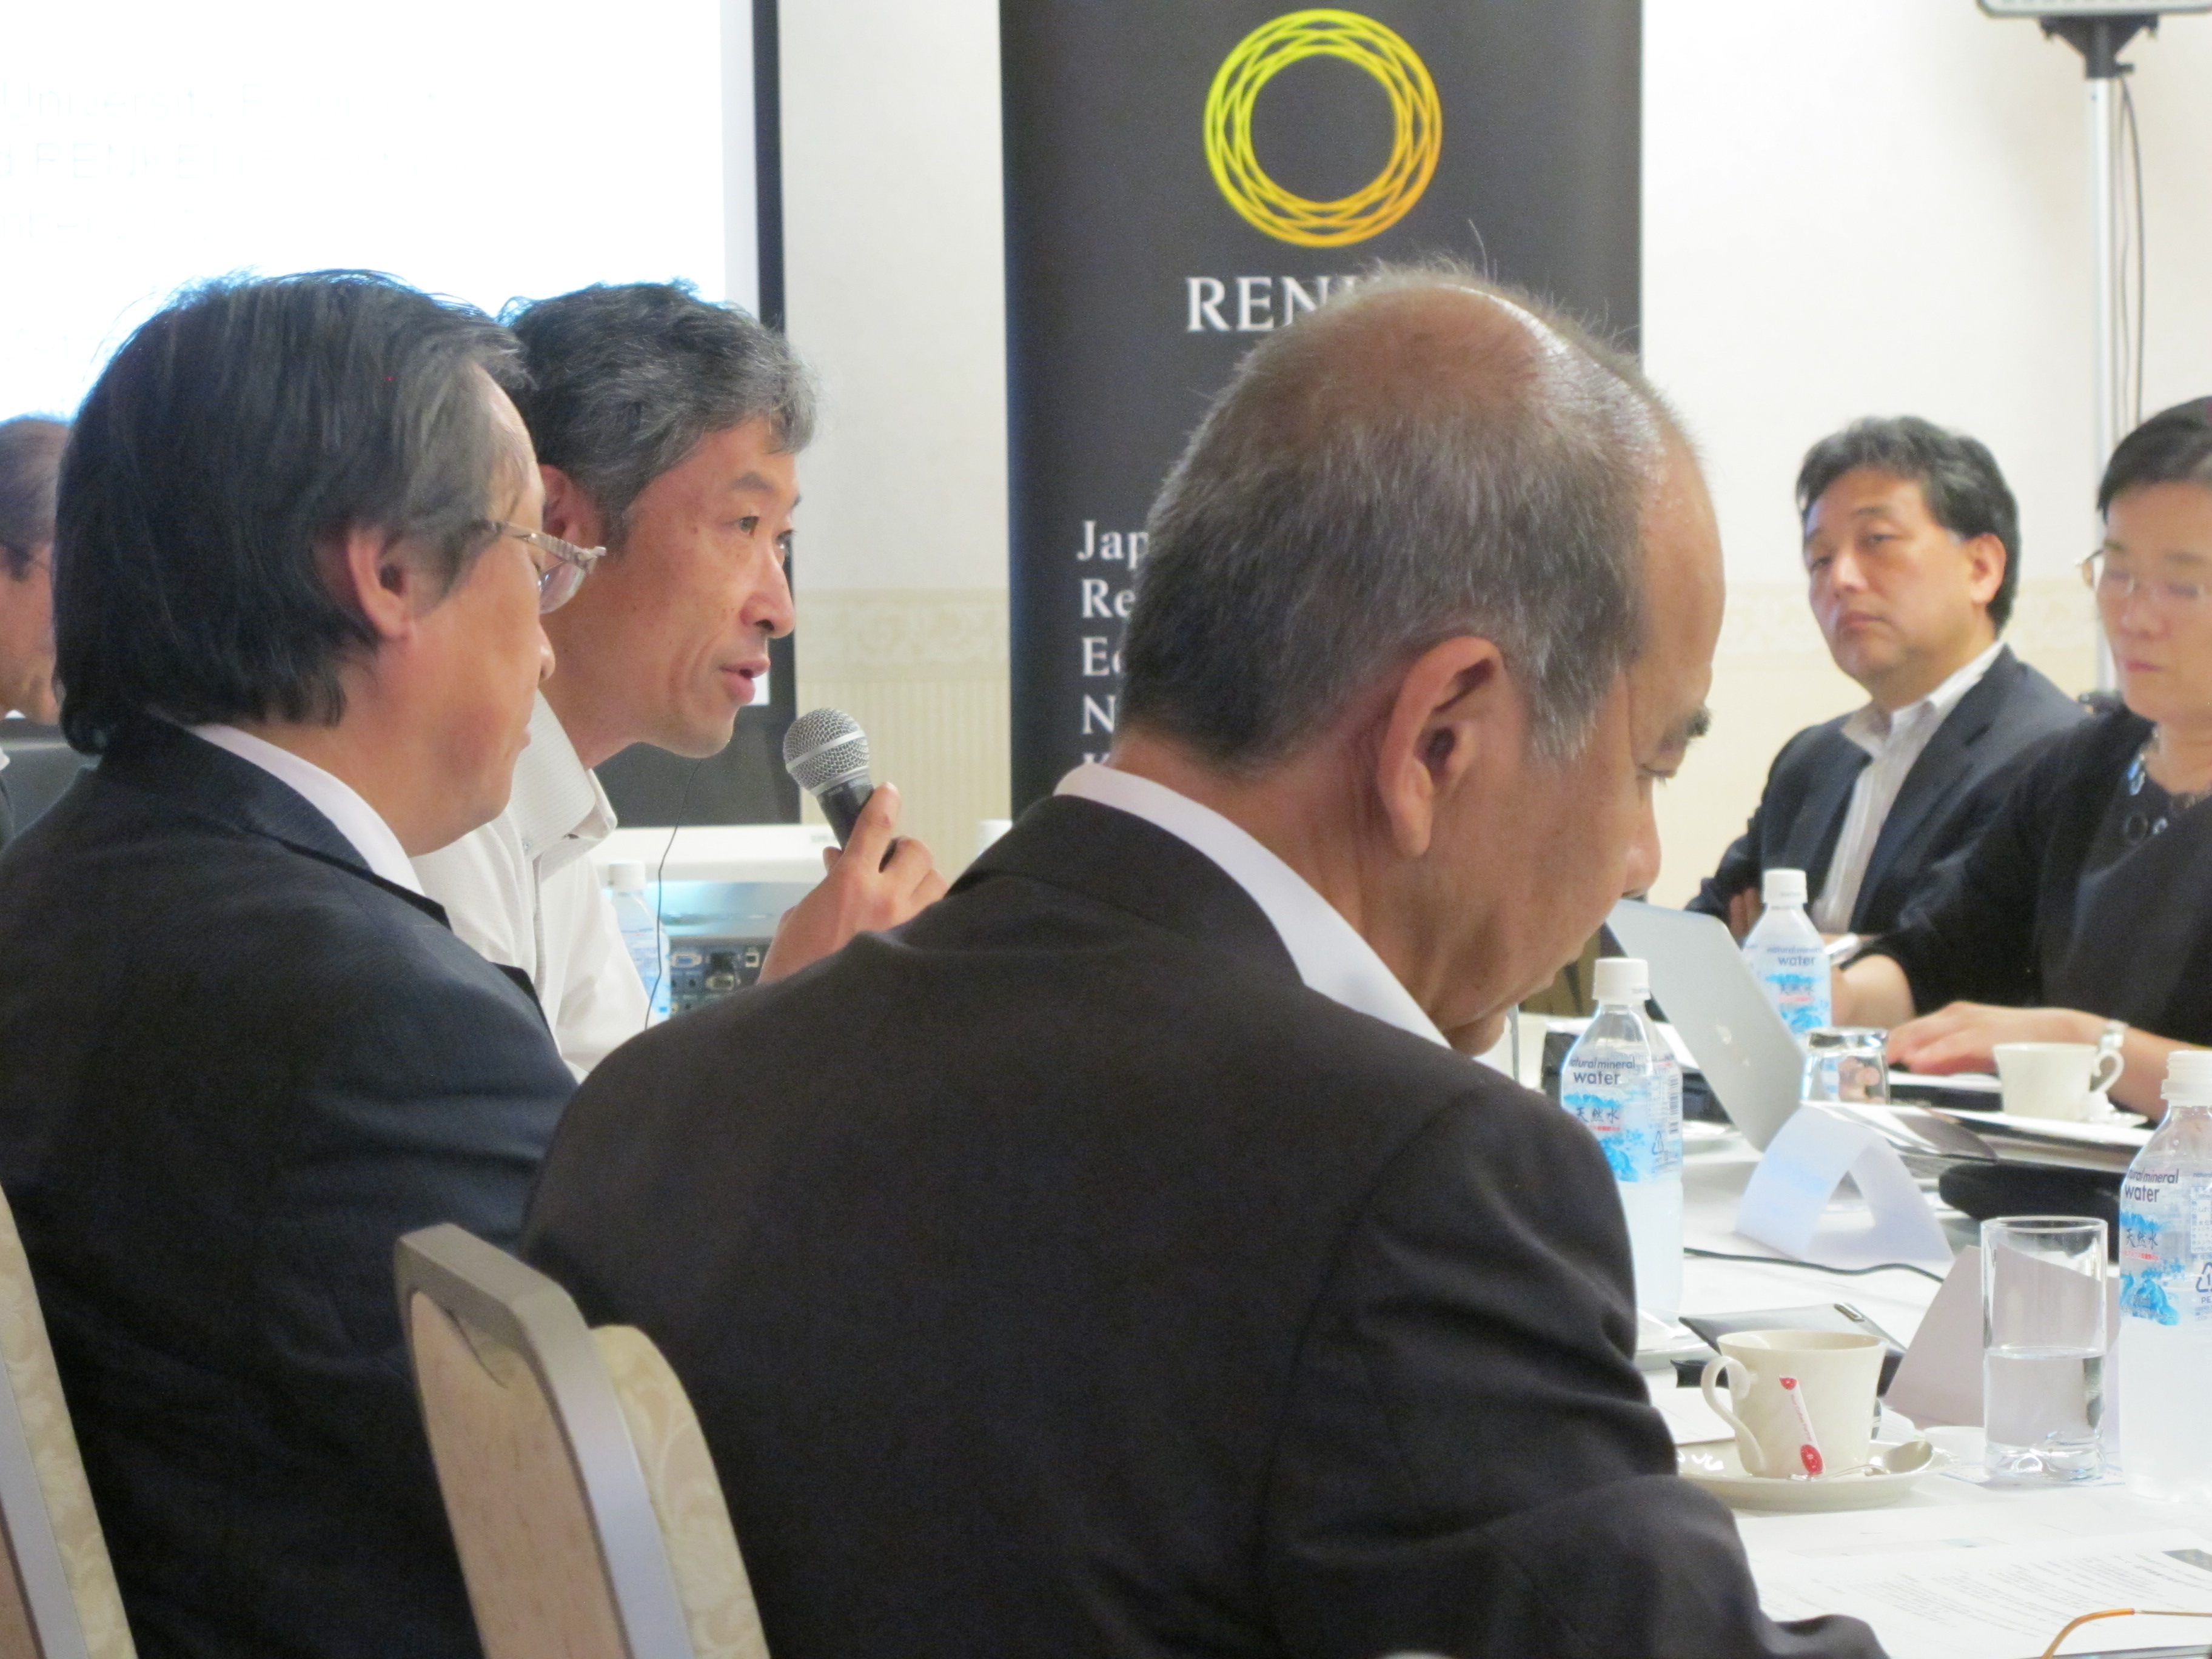 UK higher education sector forges links with Japanese industry